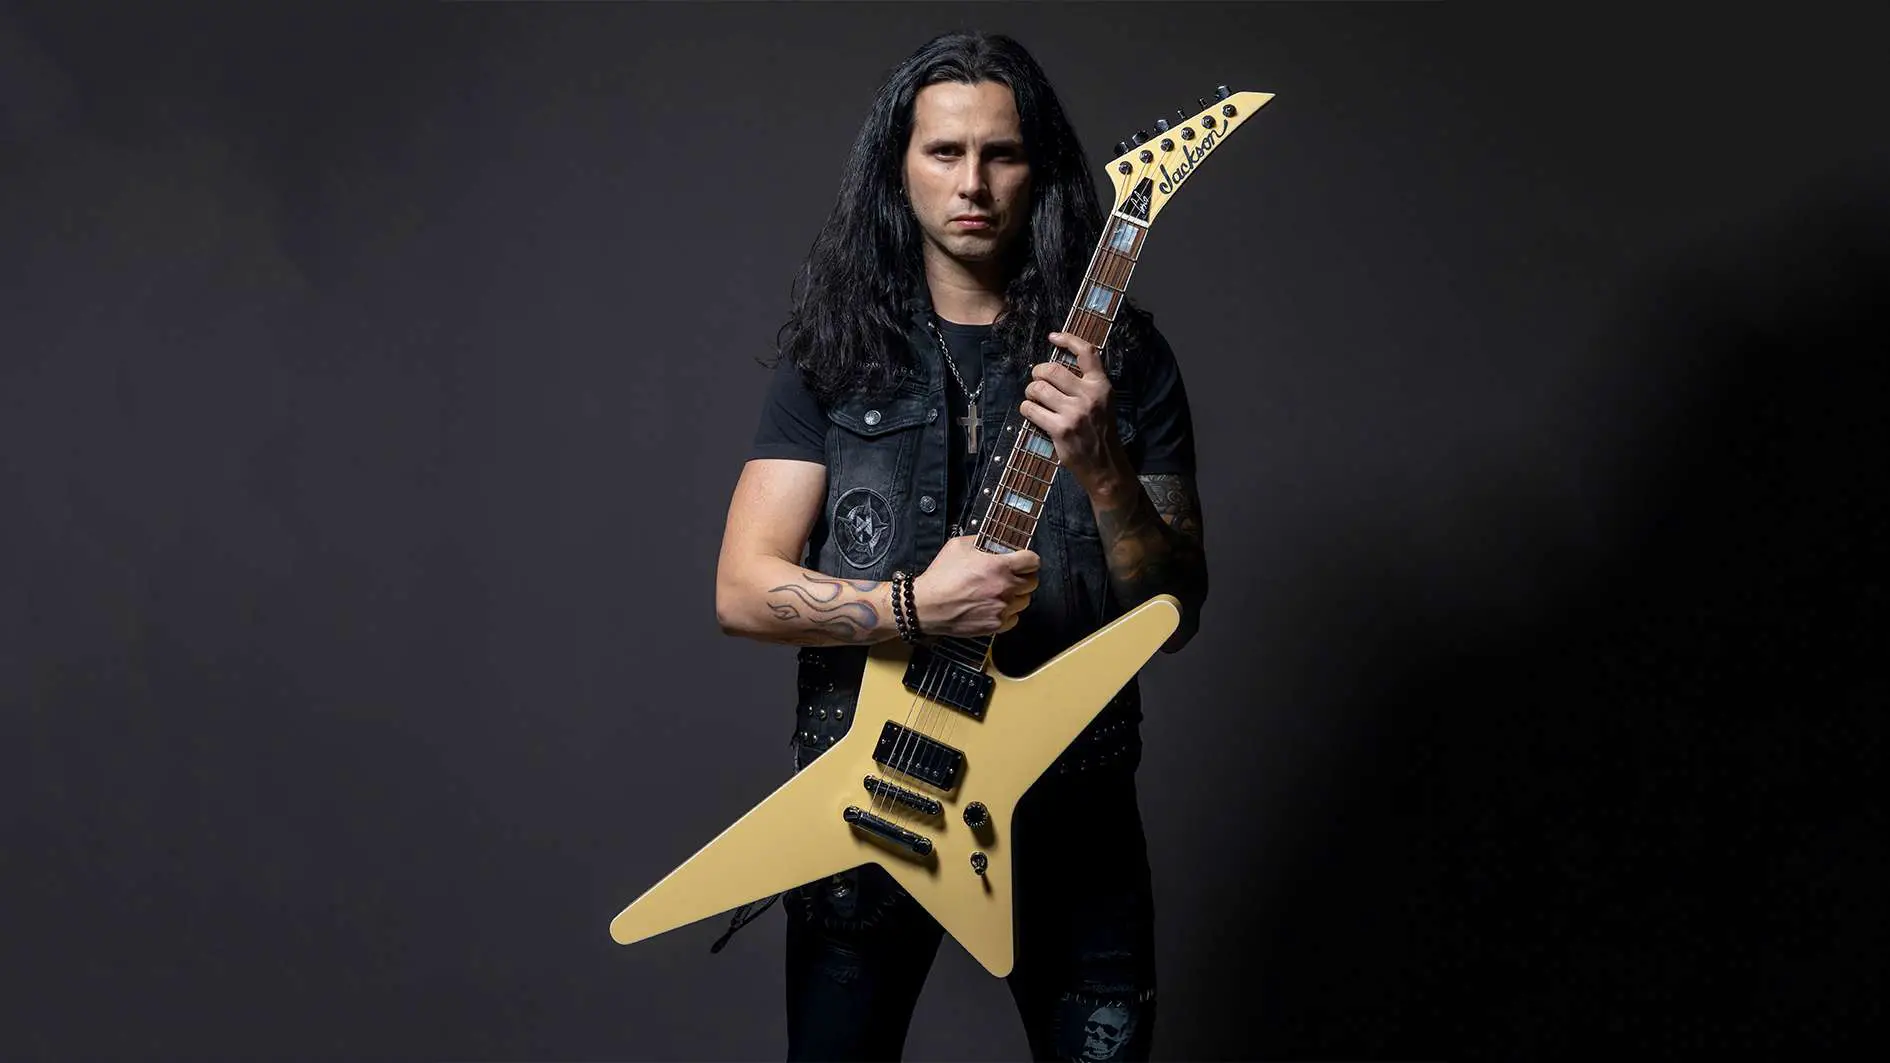 Gus G Guitarist for Ozzy